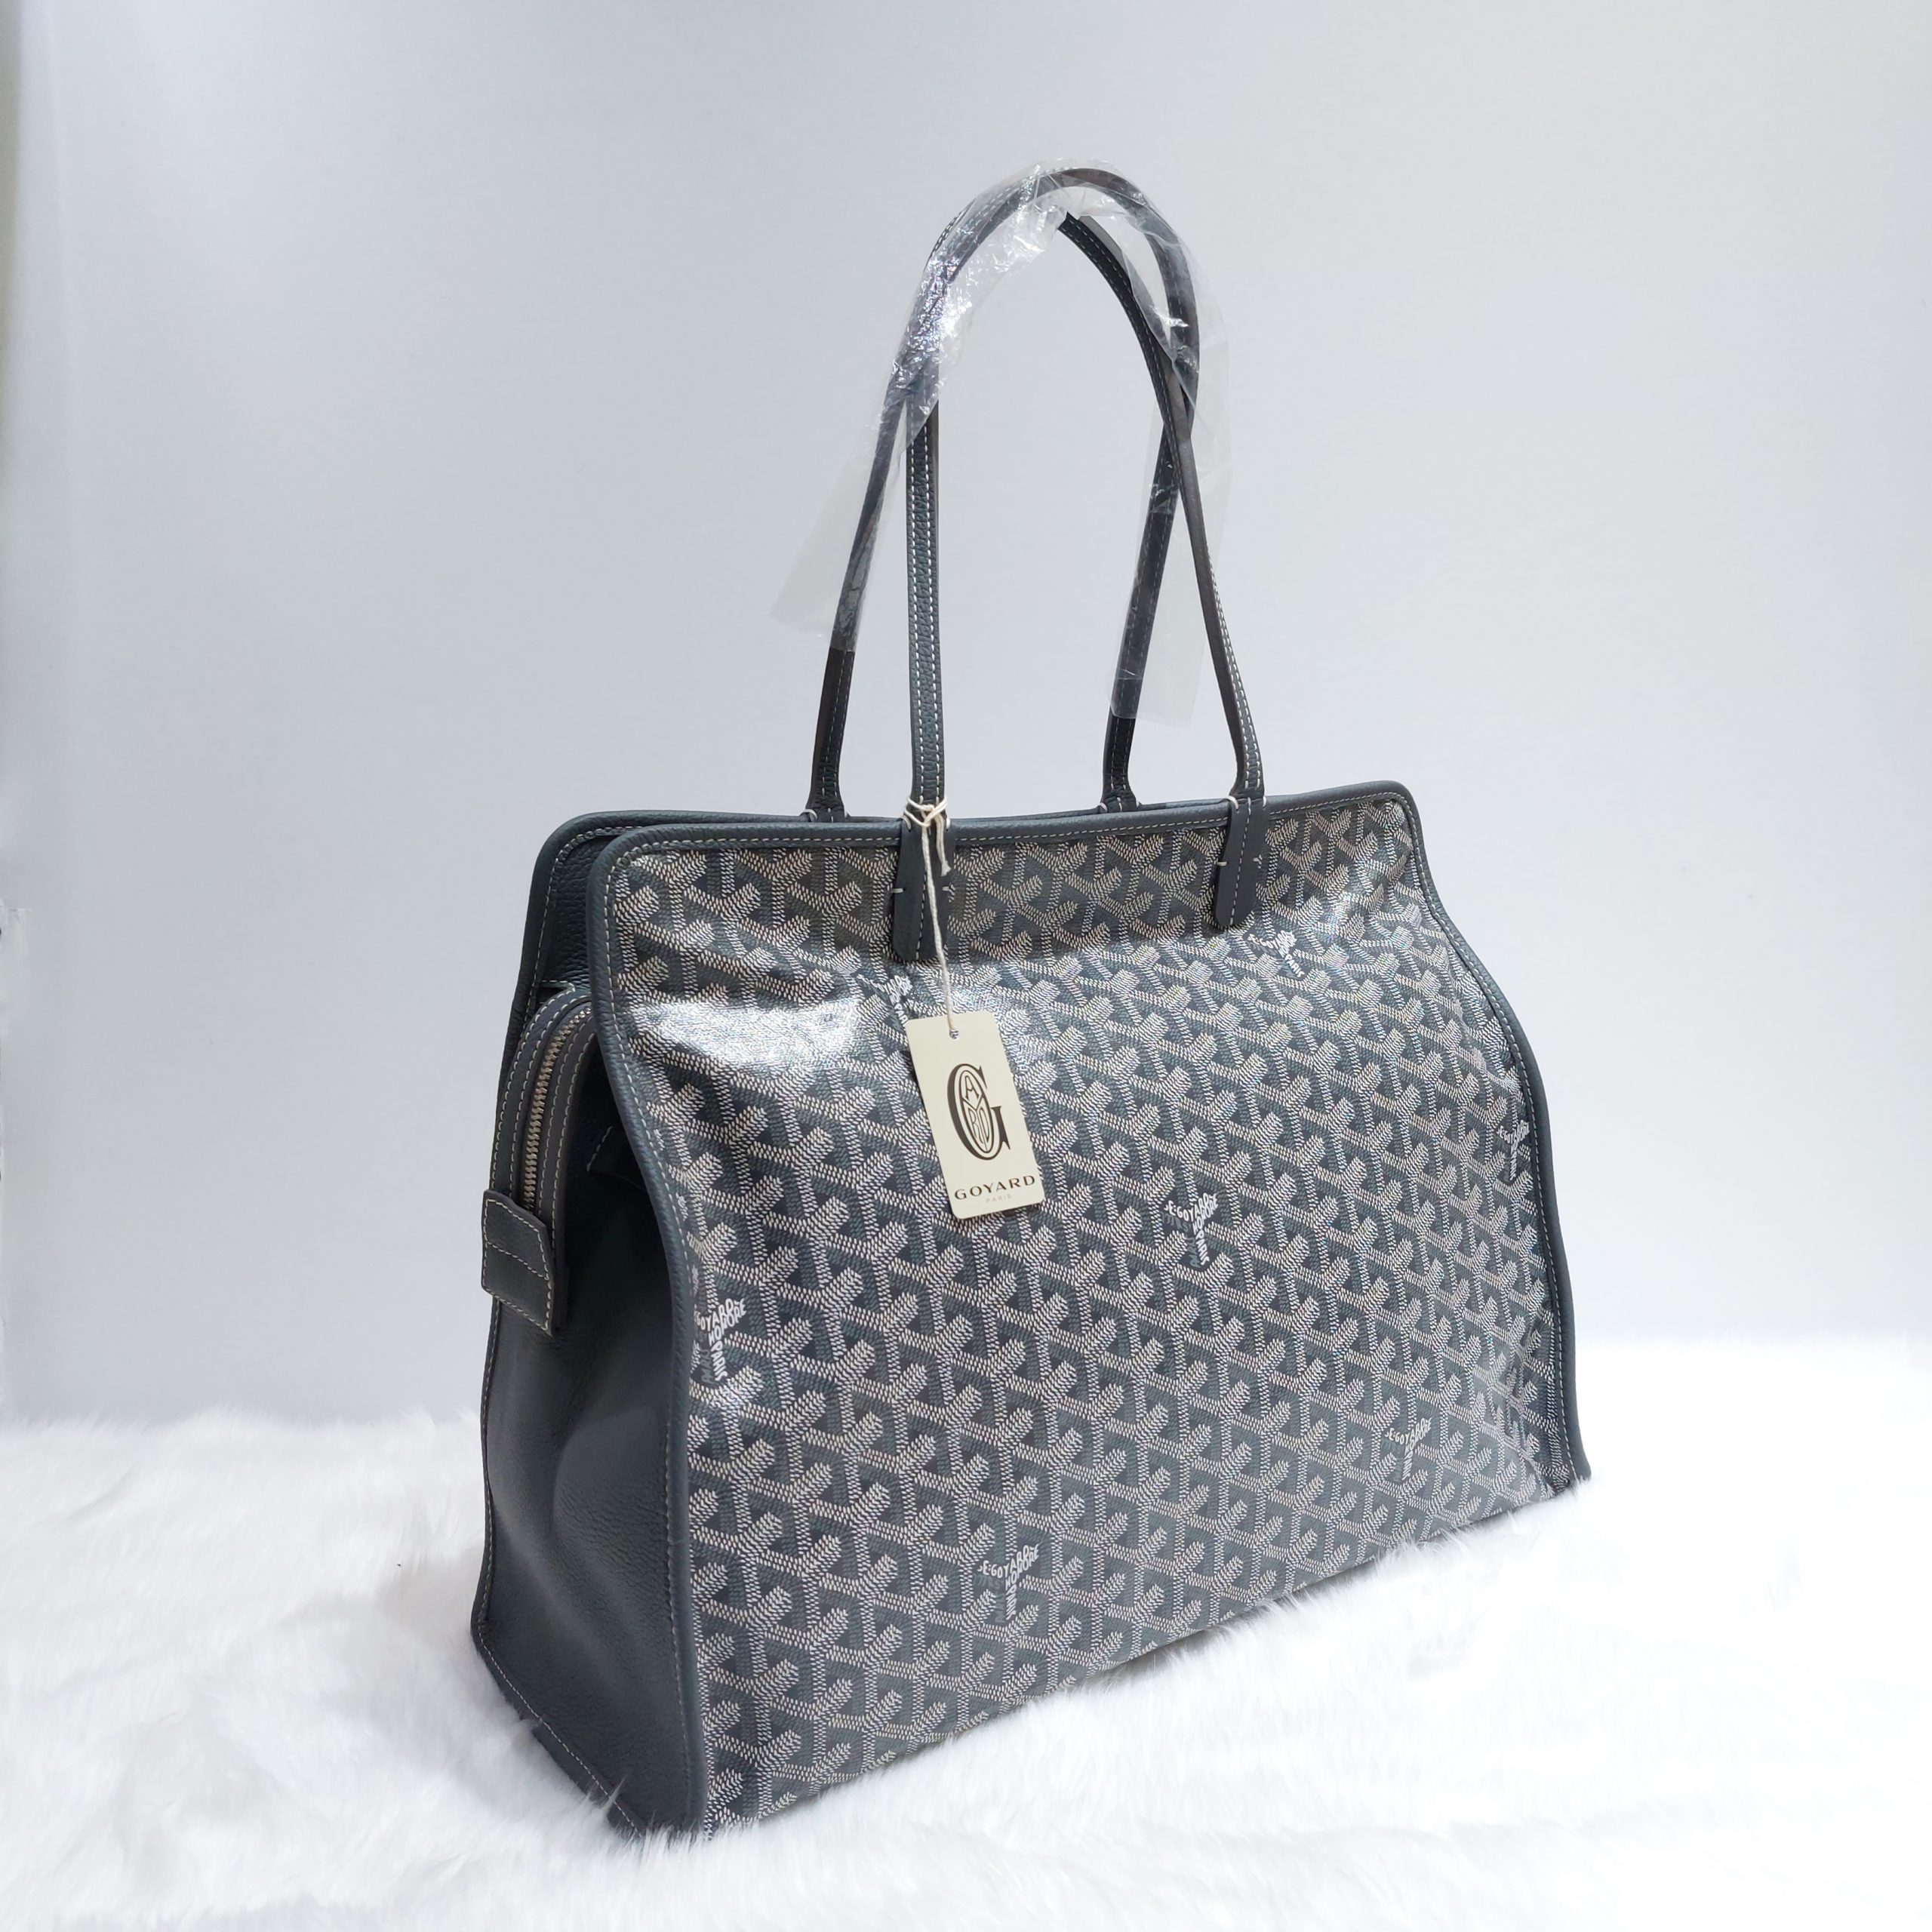 Brand New Goyard Grey Sac Hardy PM Dog Carrier Pet Bag with Pouch 13gy222s  in 2023